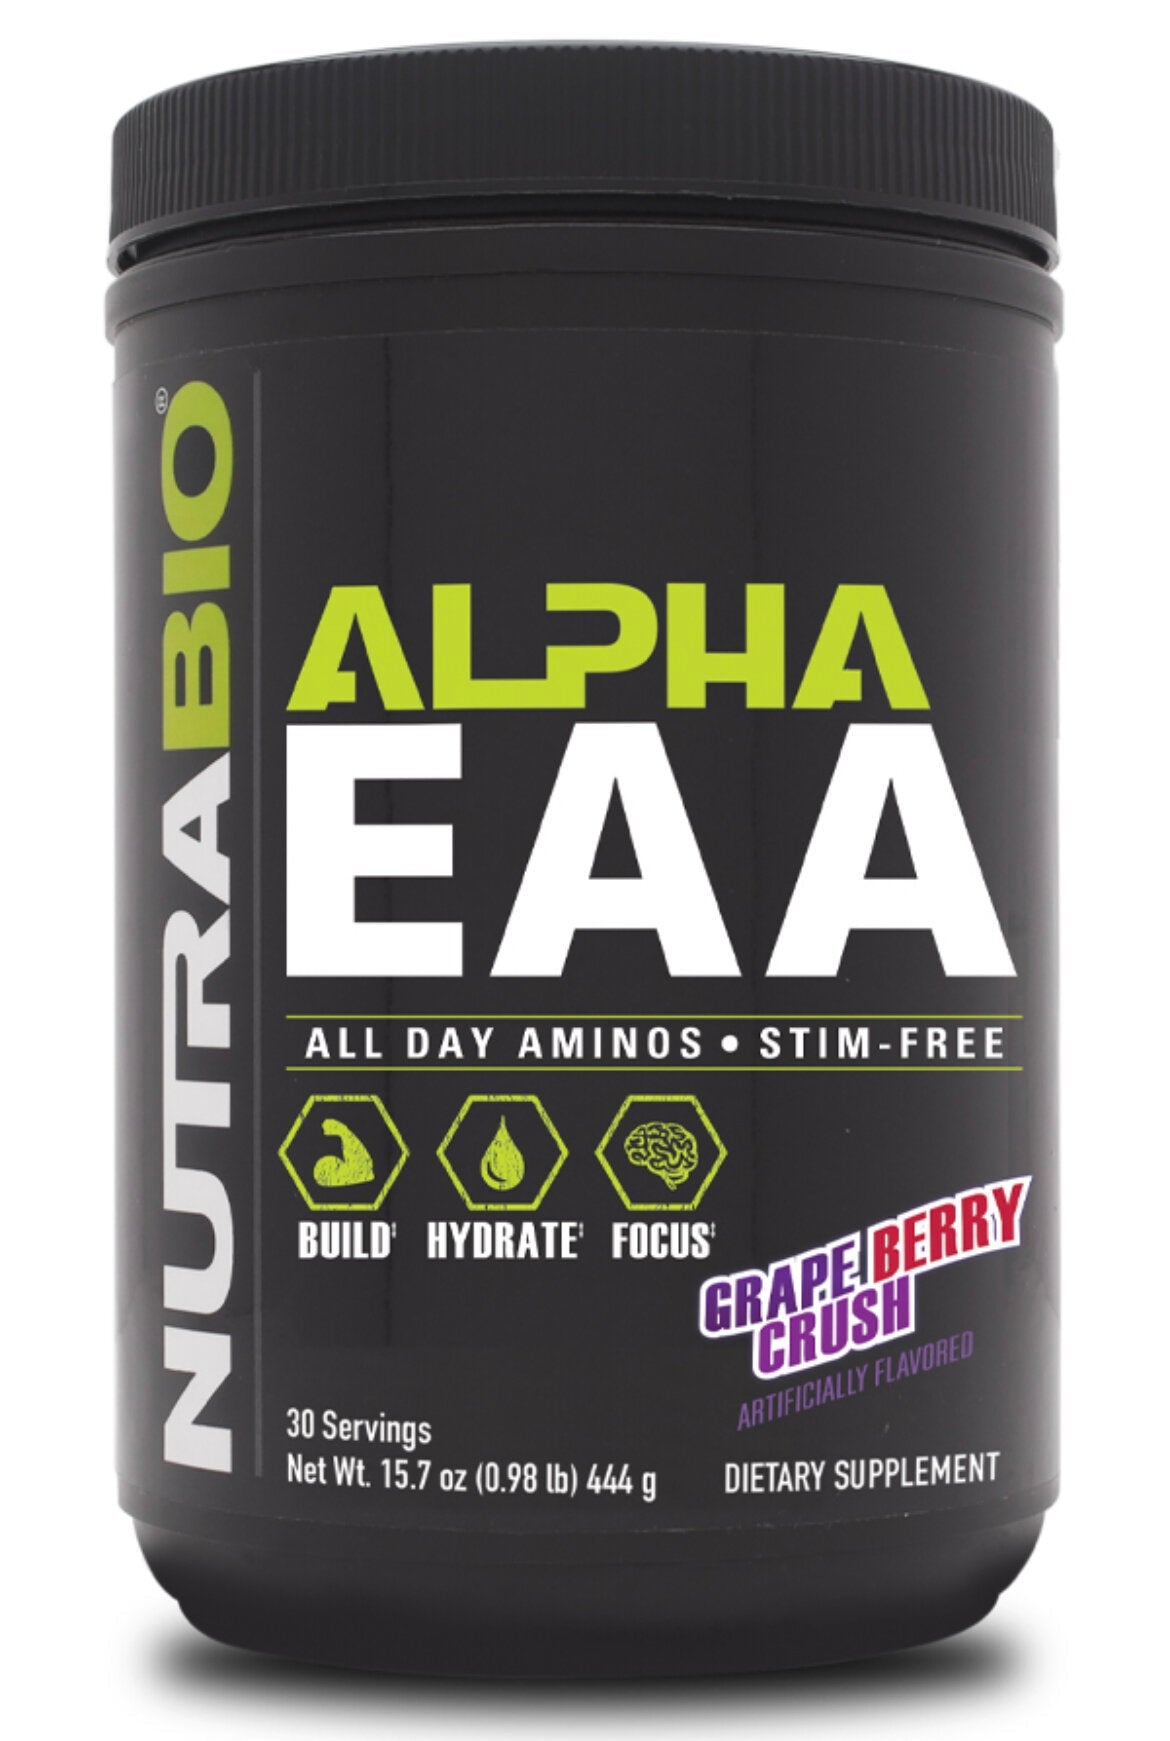 NutraBio- Alpa EAA - All Day Aminos 30 Servings - Krazy Muscle Nutrition vendor-unknownSQ7191044